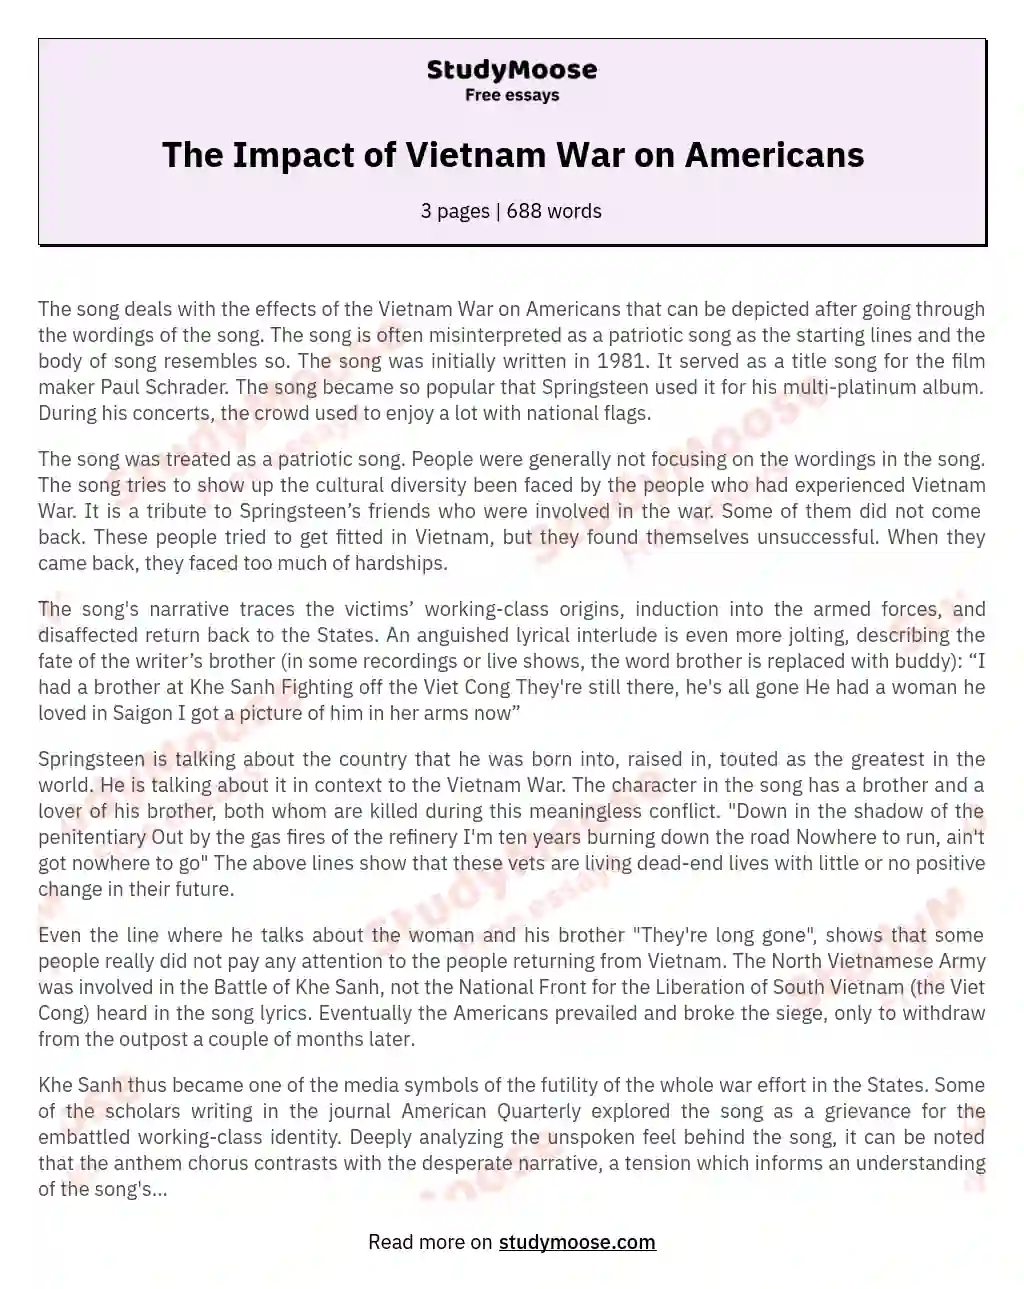 The Impact of Vietnam War on Americans essay